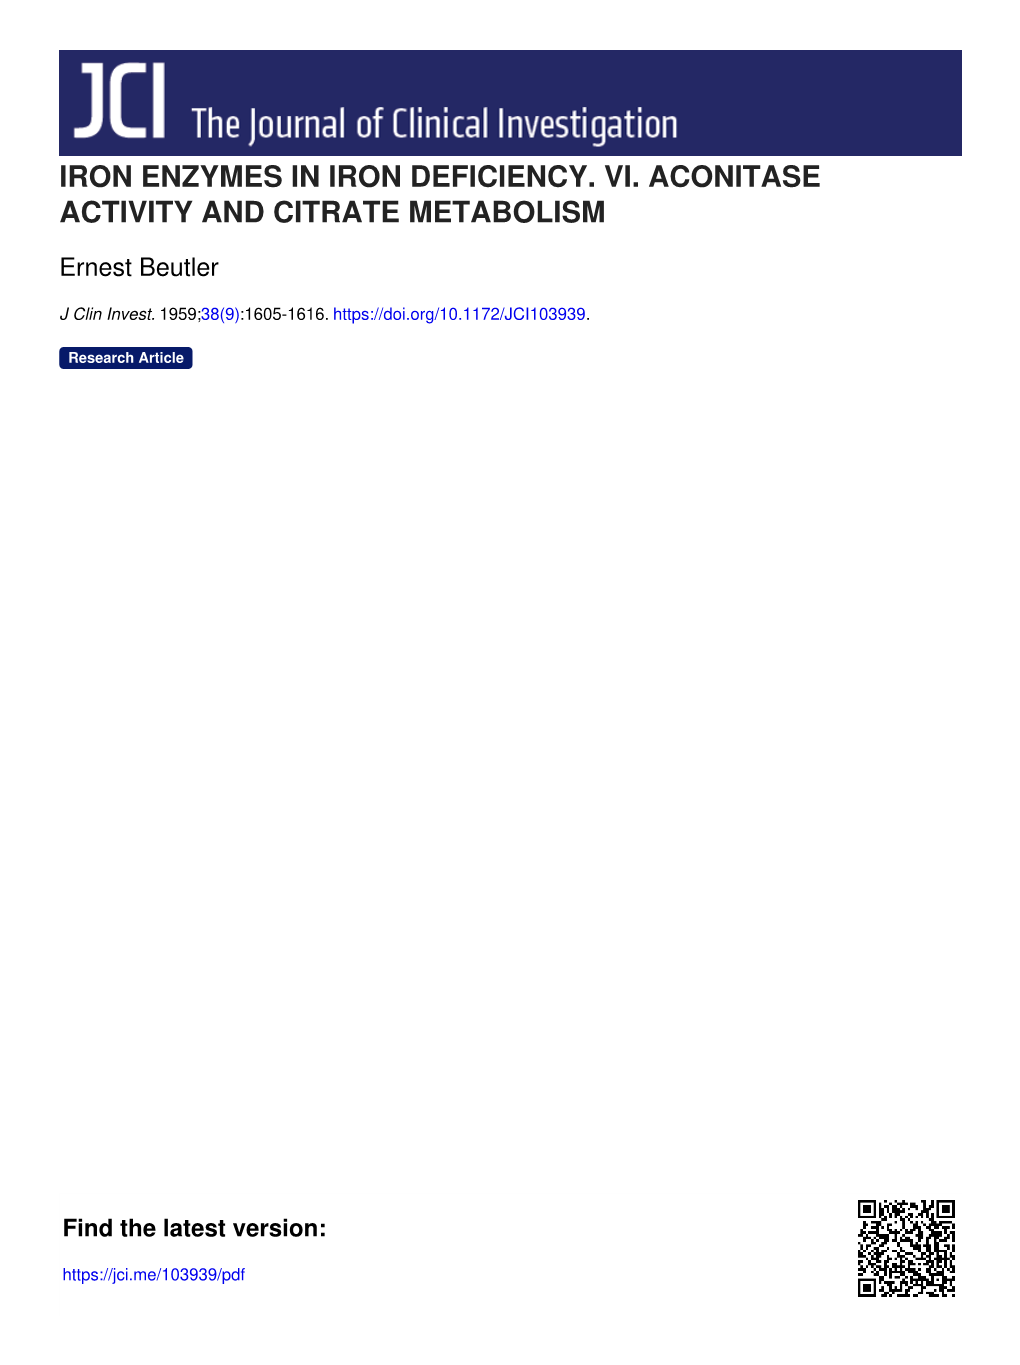 Iron Enzymes in Iron Deficiency. Vi. Aconitase Activity and Citrate Metabolism